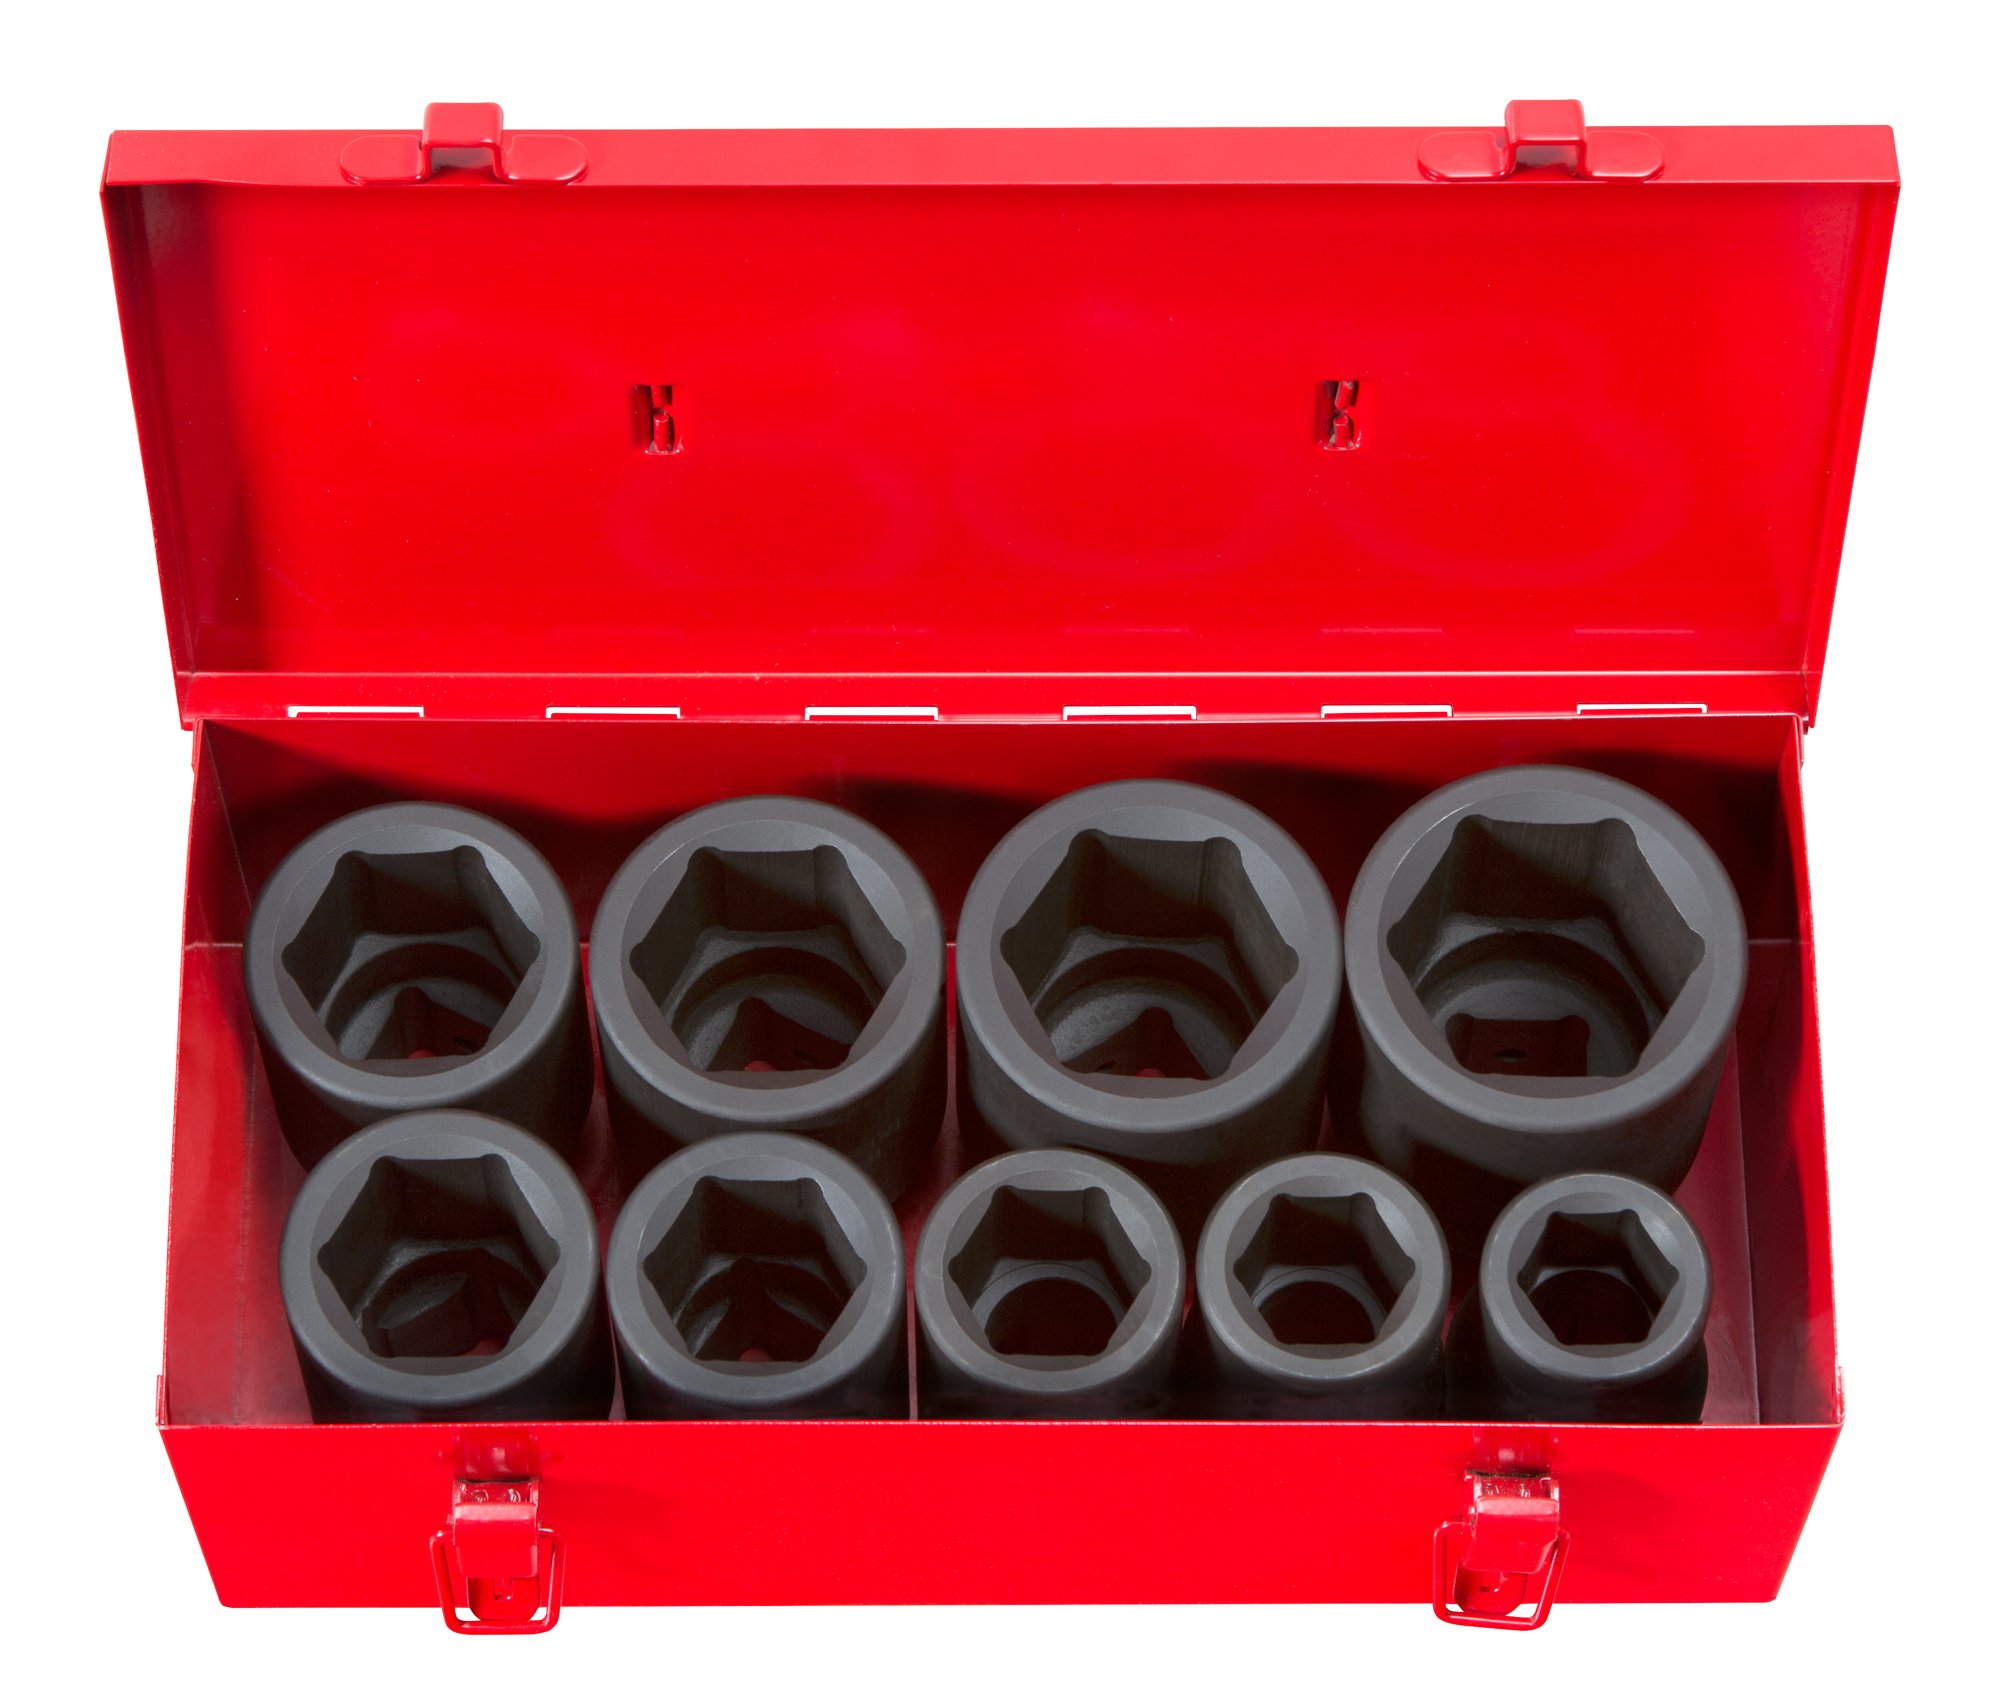 TEKTON 1 Inch Drive Deep 6-Point Impact Socket Set, 9-Piece (1-2 in.) | 4892 and BIG RED TA92006 Torin Pneumatic Air Hydraulic Bottle Jack with Manual Hand Pump, 20 Ton (40,000 lb) Capacity, Red